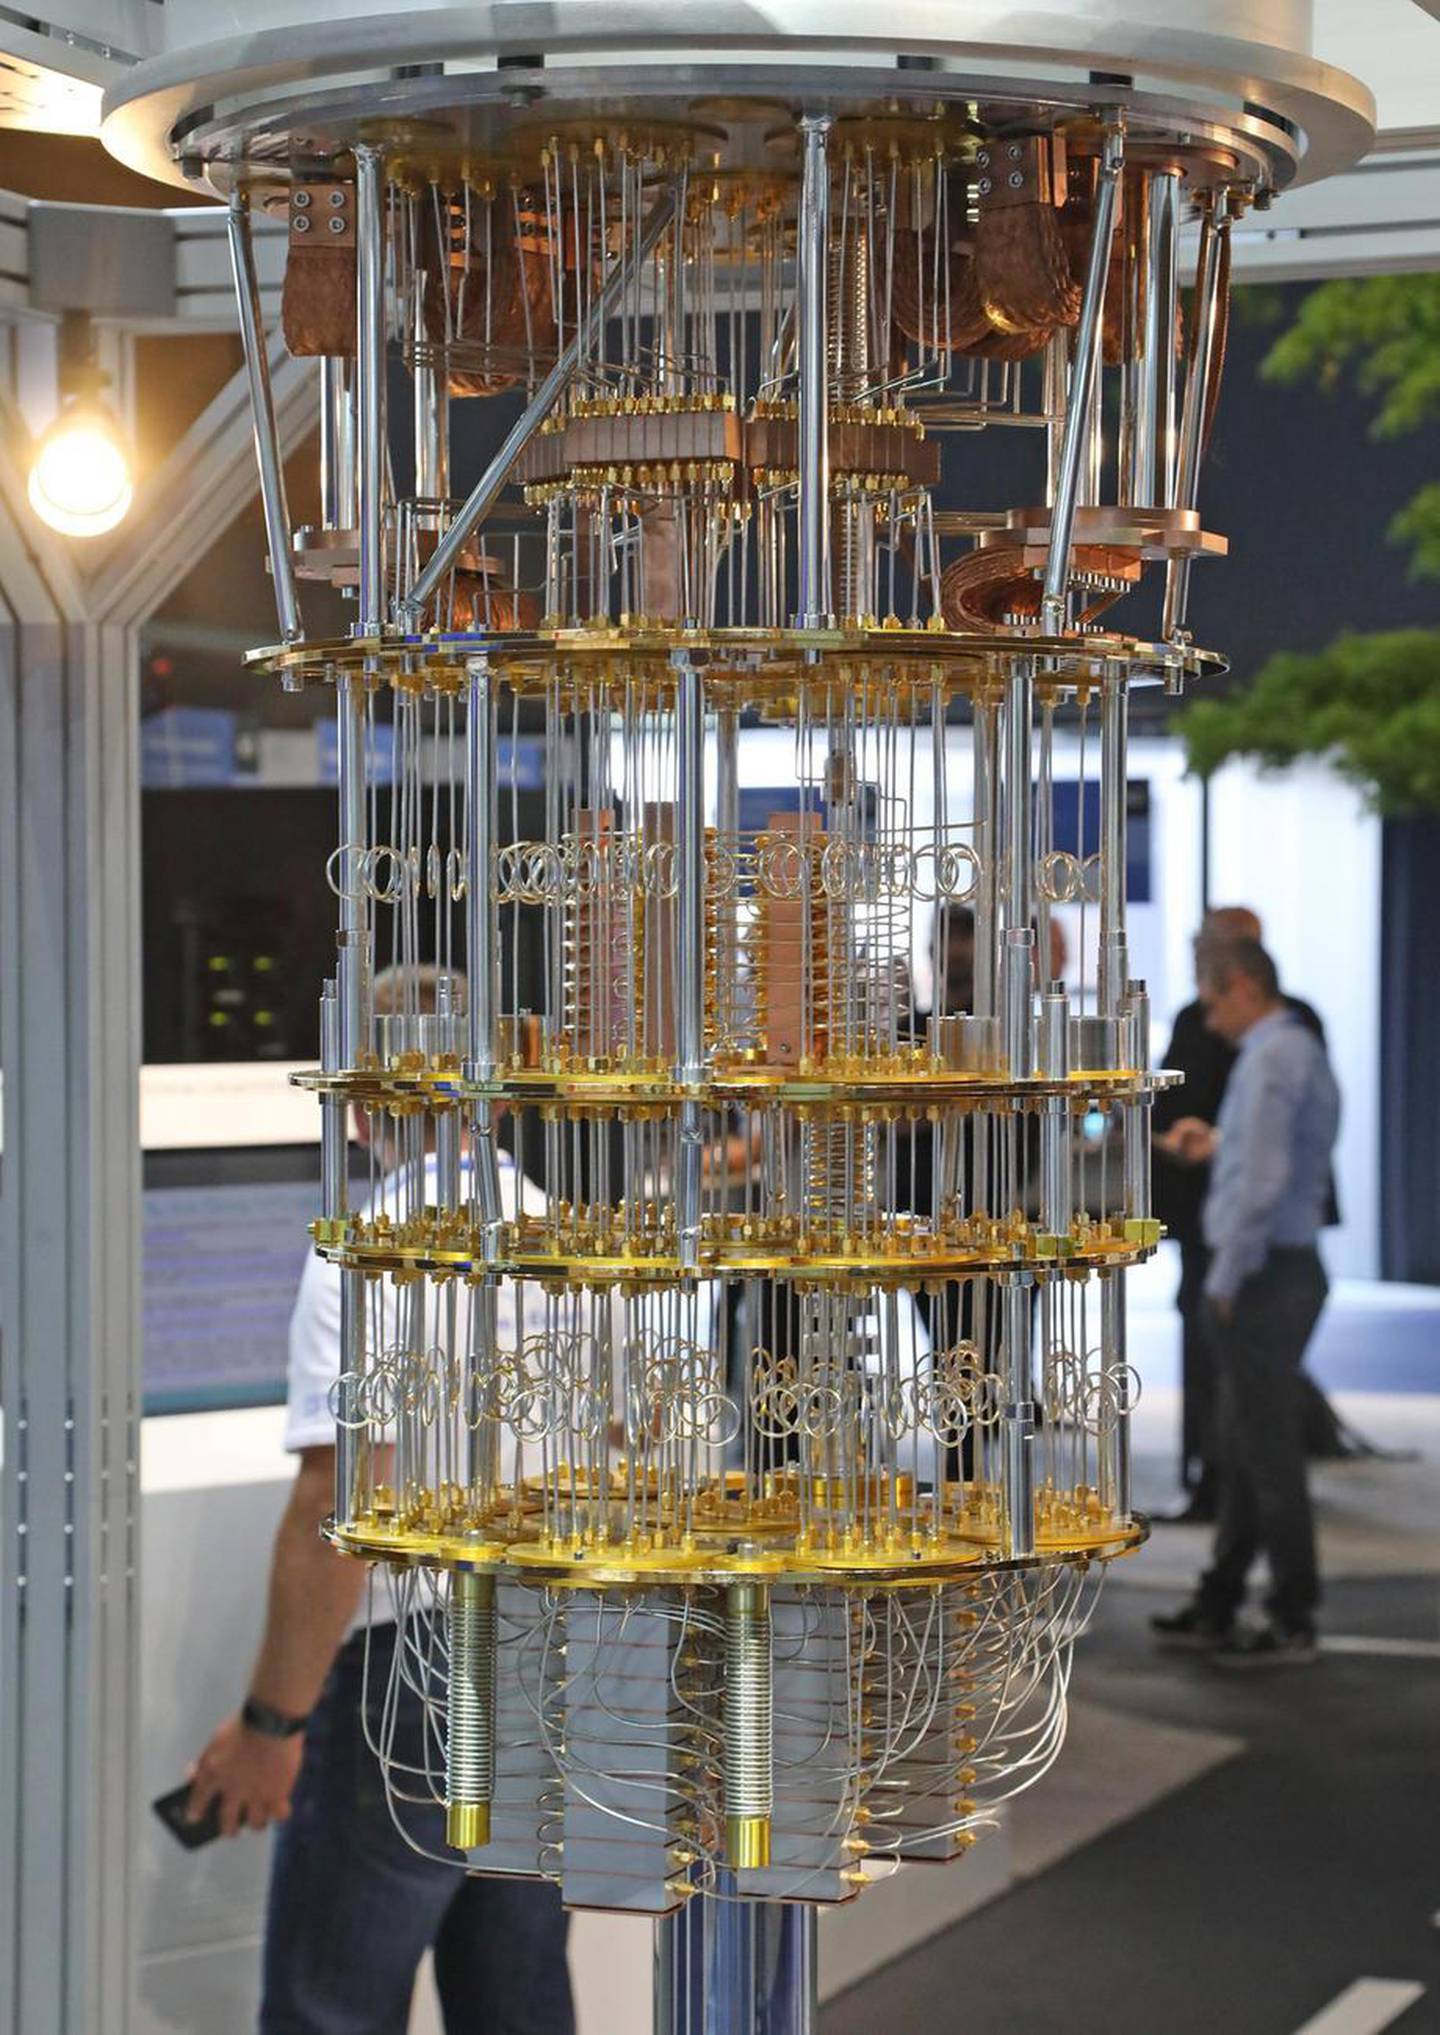 Quantum computers are as fragile as they are complex. They require an ultra-cold environment to operate of just above zero Kelvin – a unit of temperature which is minus 273. EPA